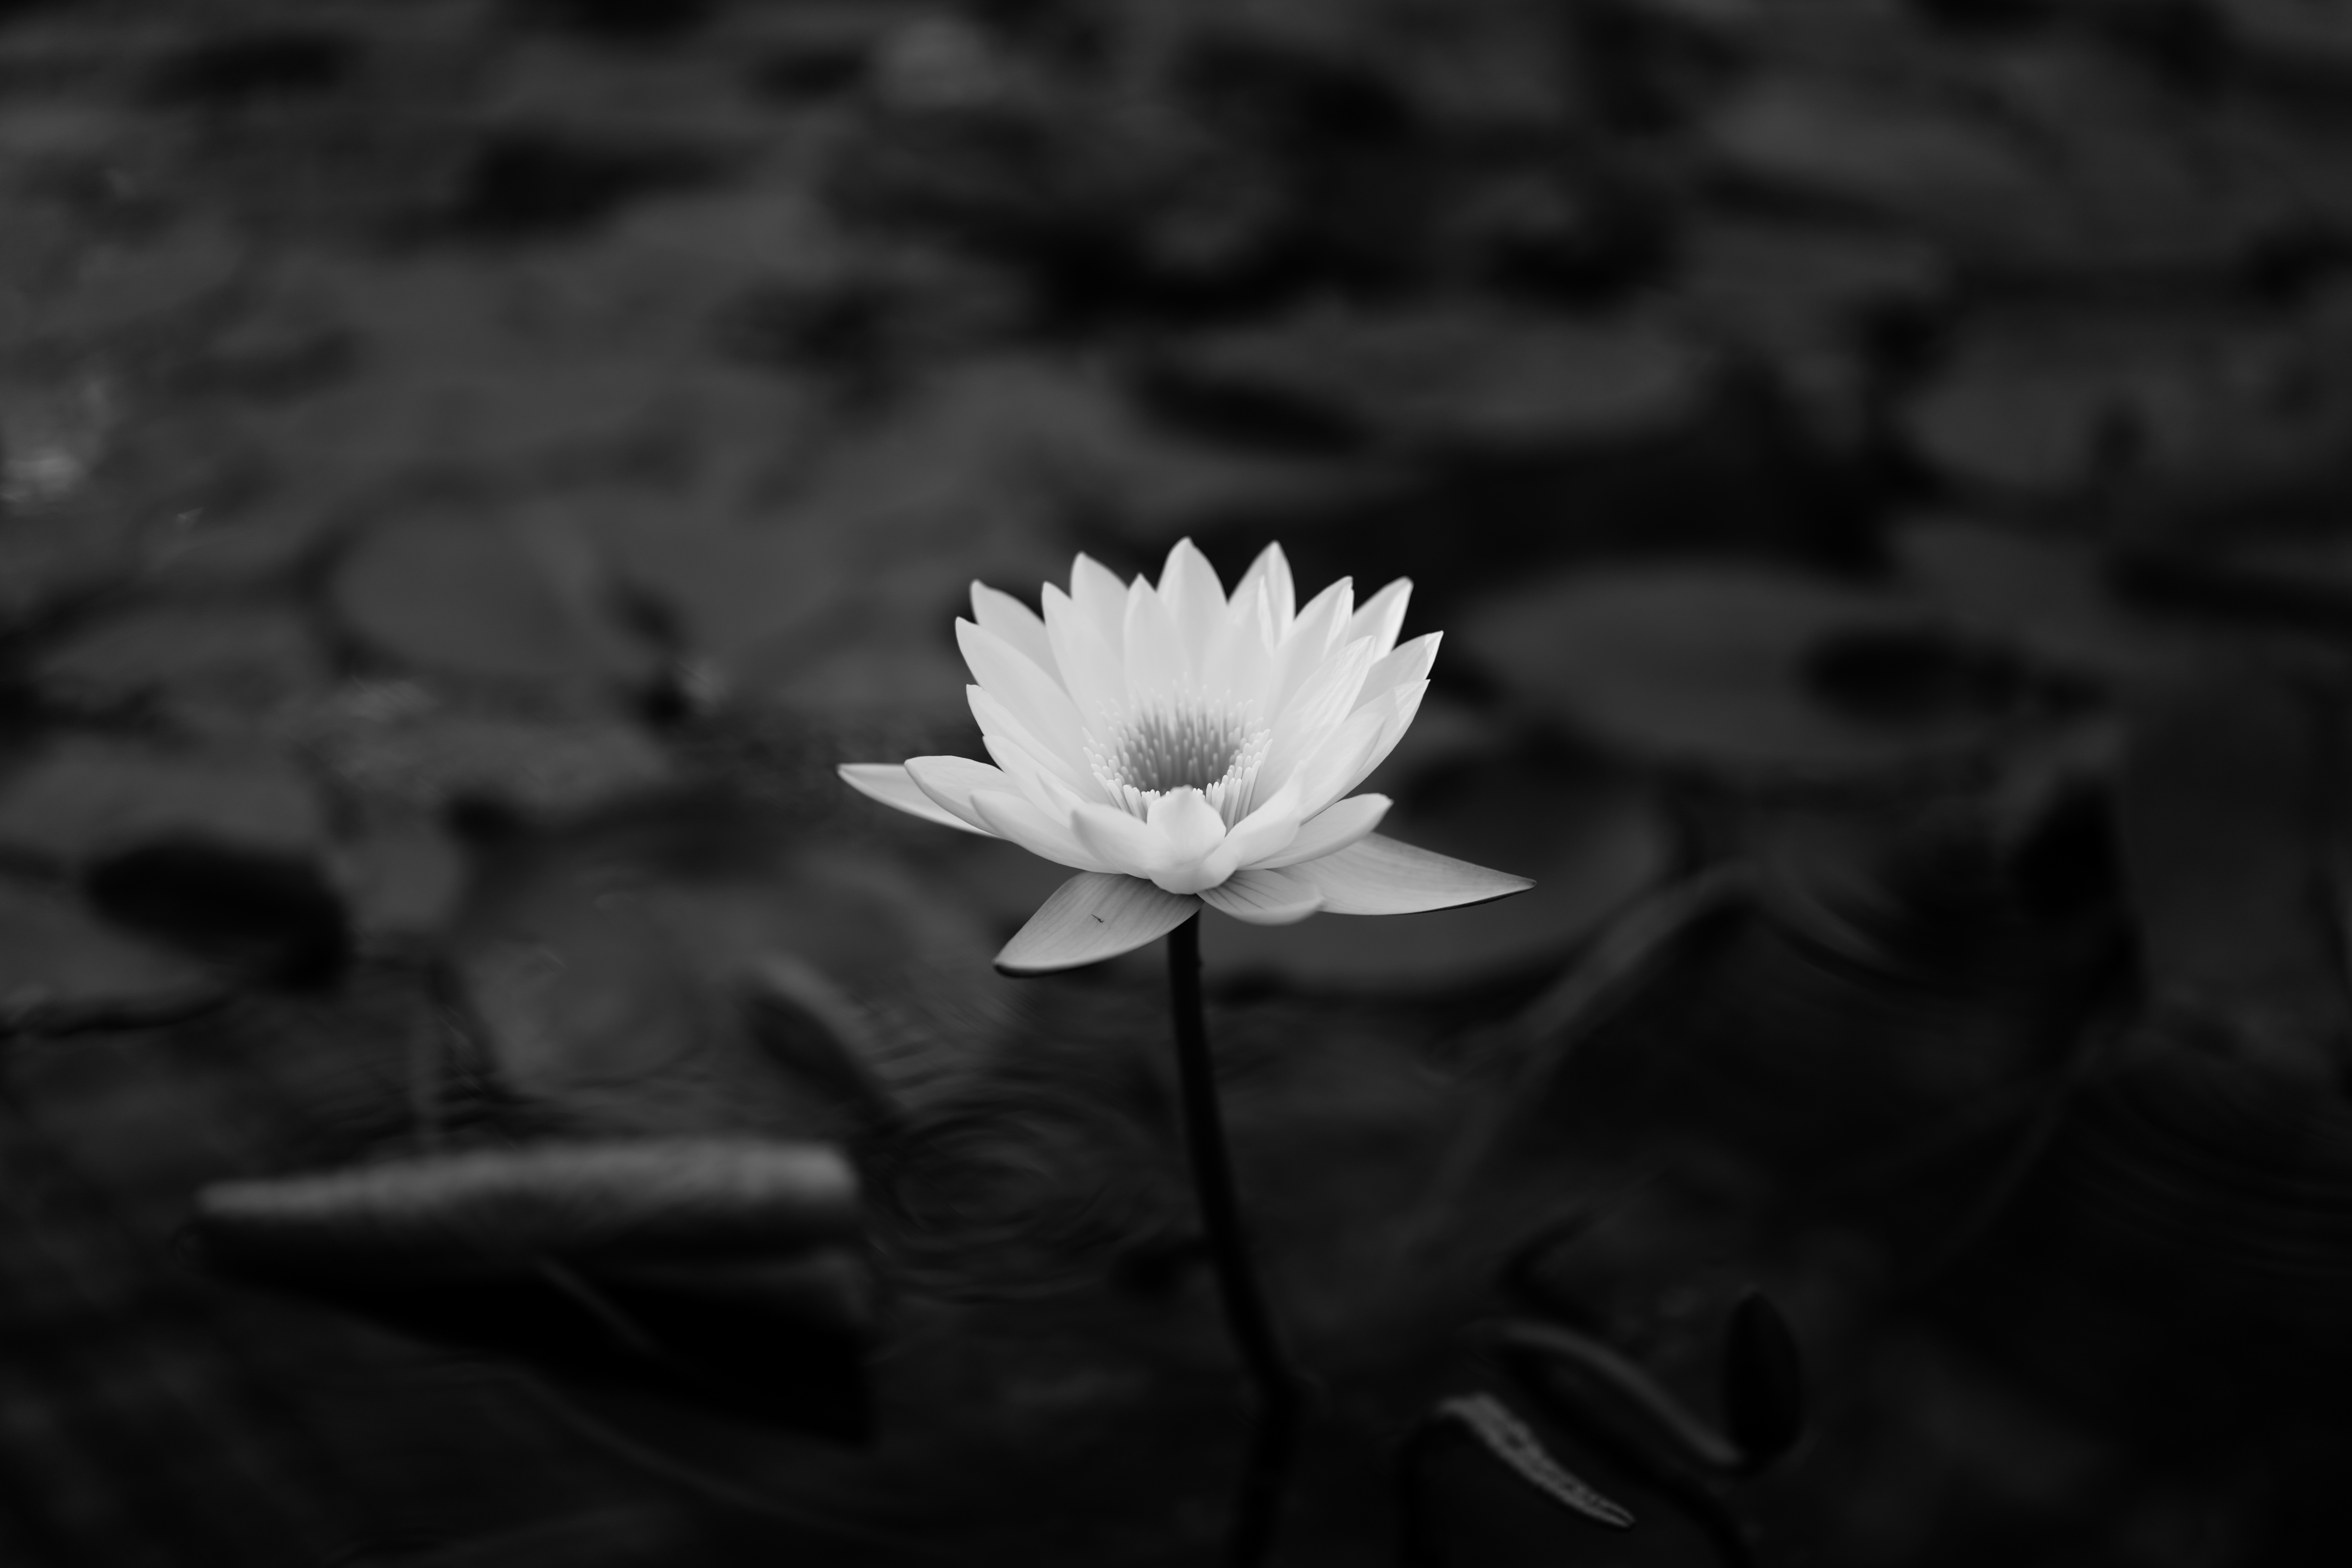 bw, water lily, lotus, flowers, leaves, chb wallpaper for mobile